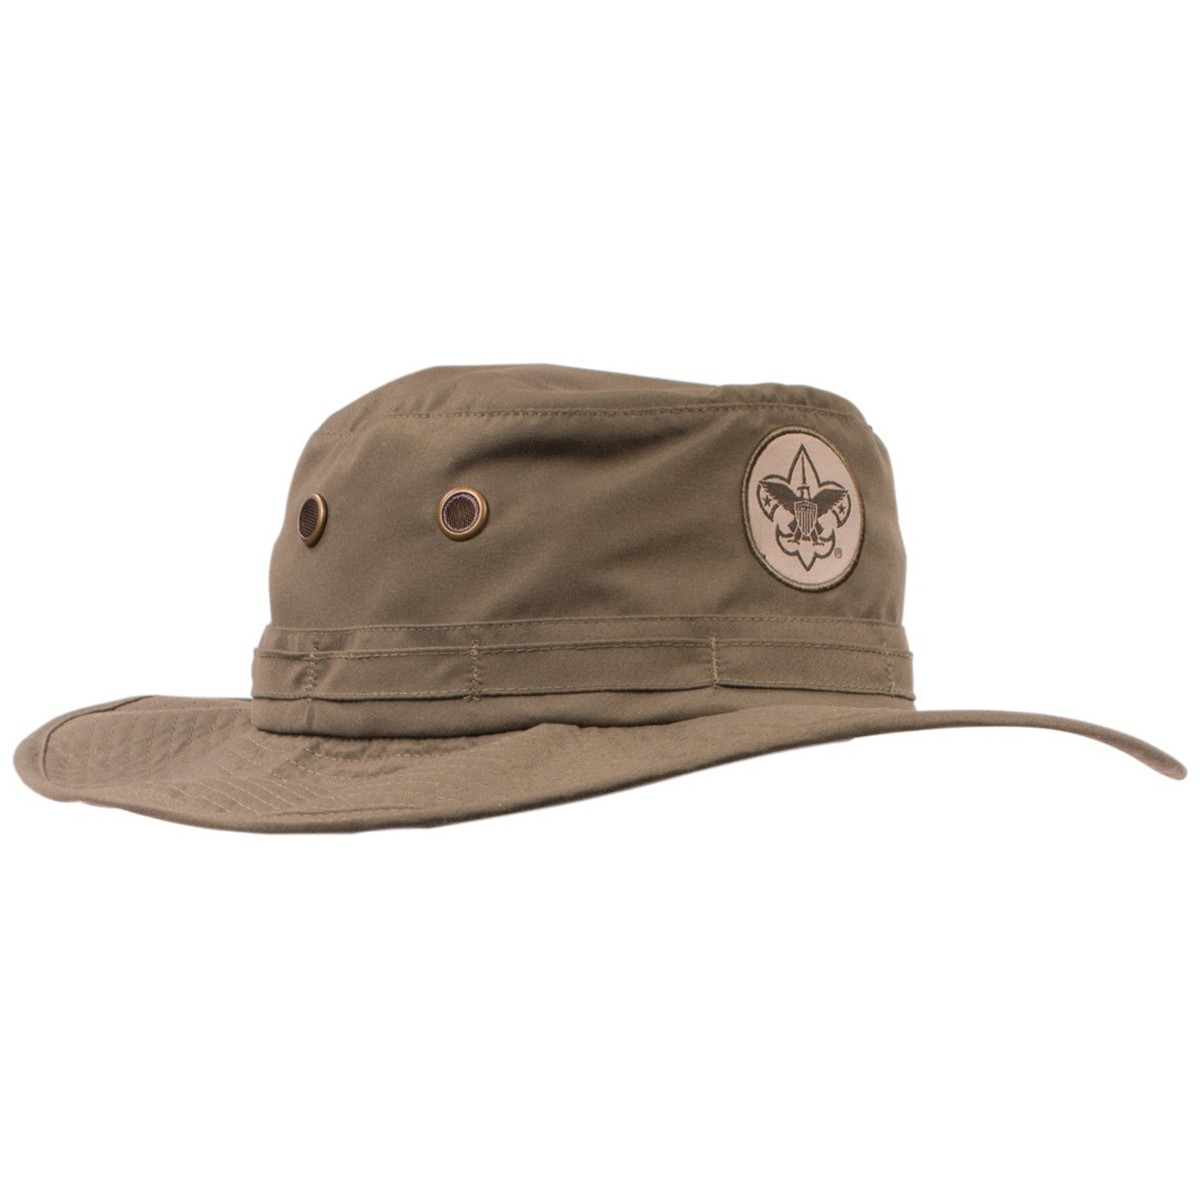 Details about   Limited Edition 1910-2000 Baseball Cap Adjustable-Boy Scouts of America BSA NEW 